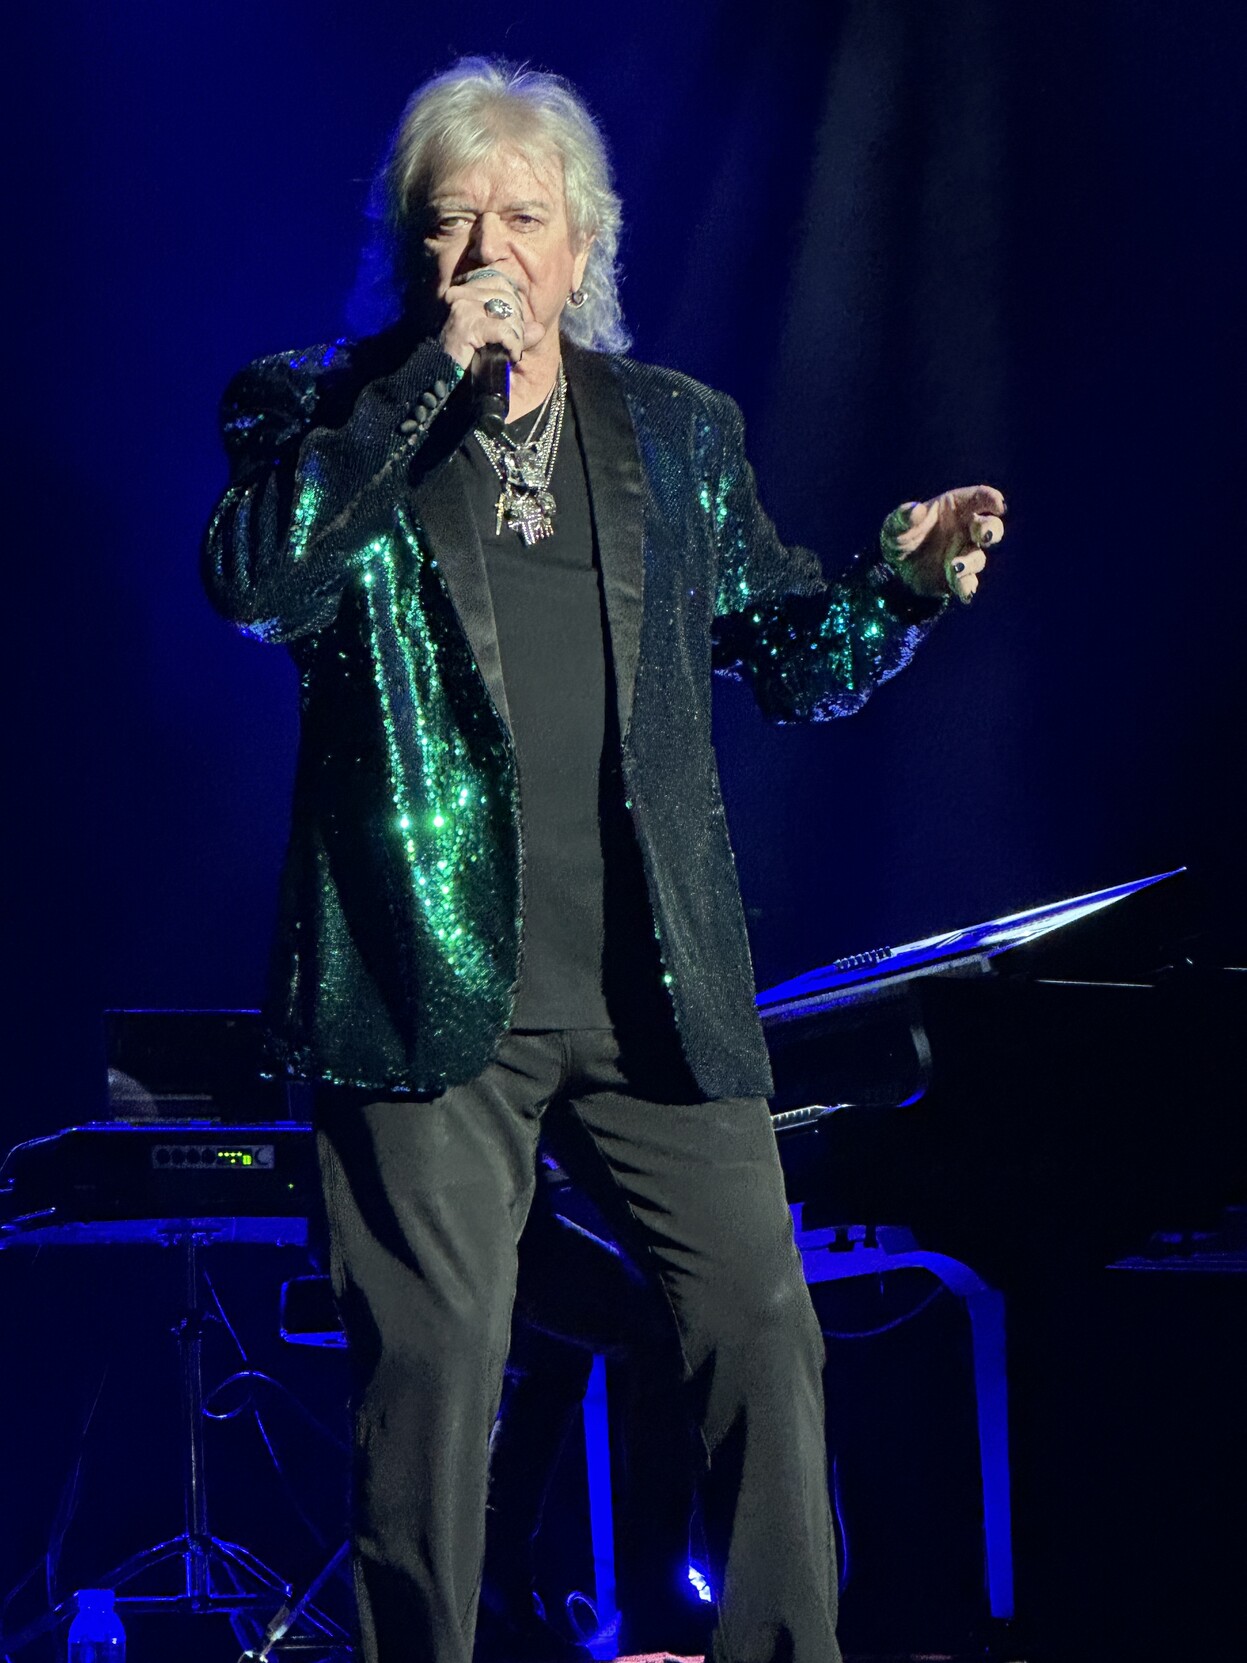 Russell Hitchcock singing while wearing a sequined green jacket